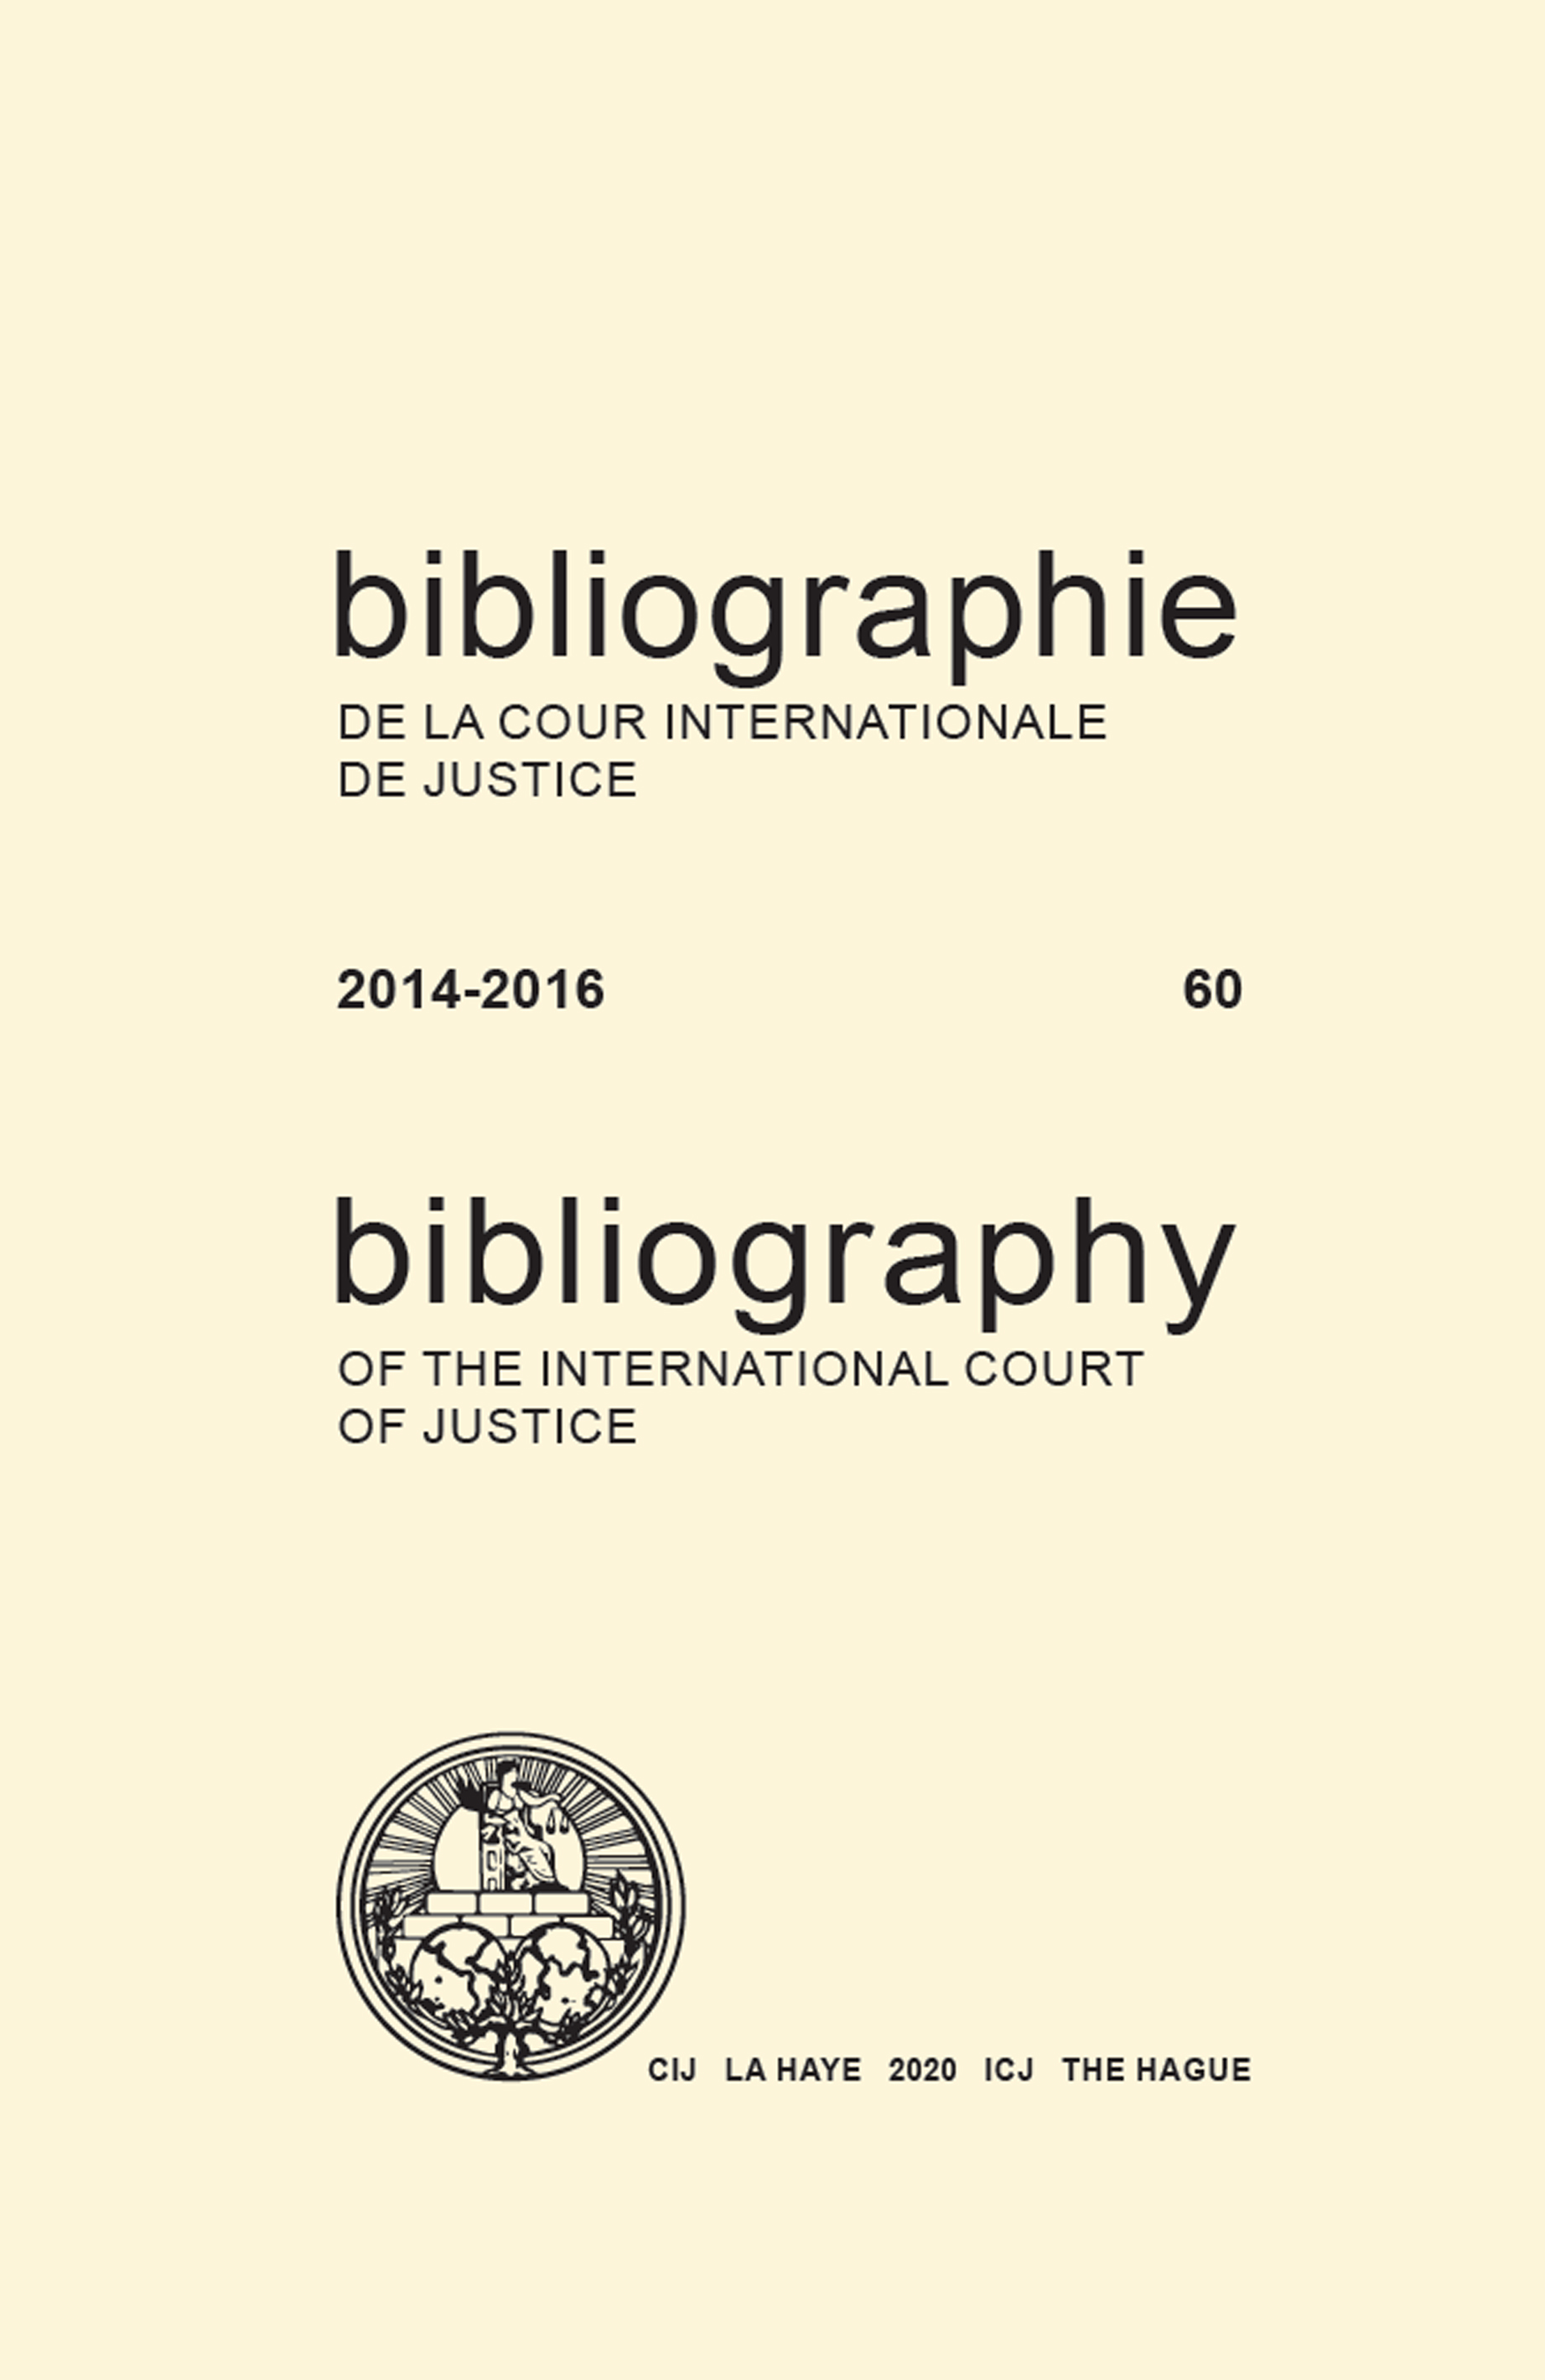 image of Bibliography of the International Court of Justice 2014-2016